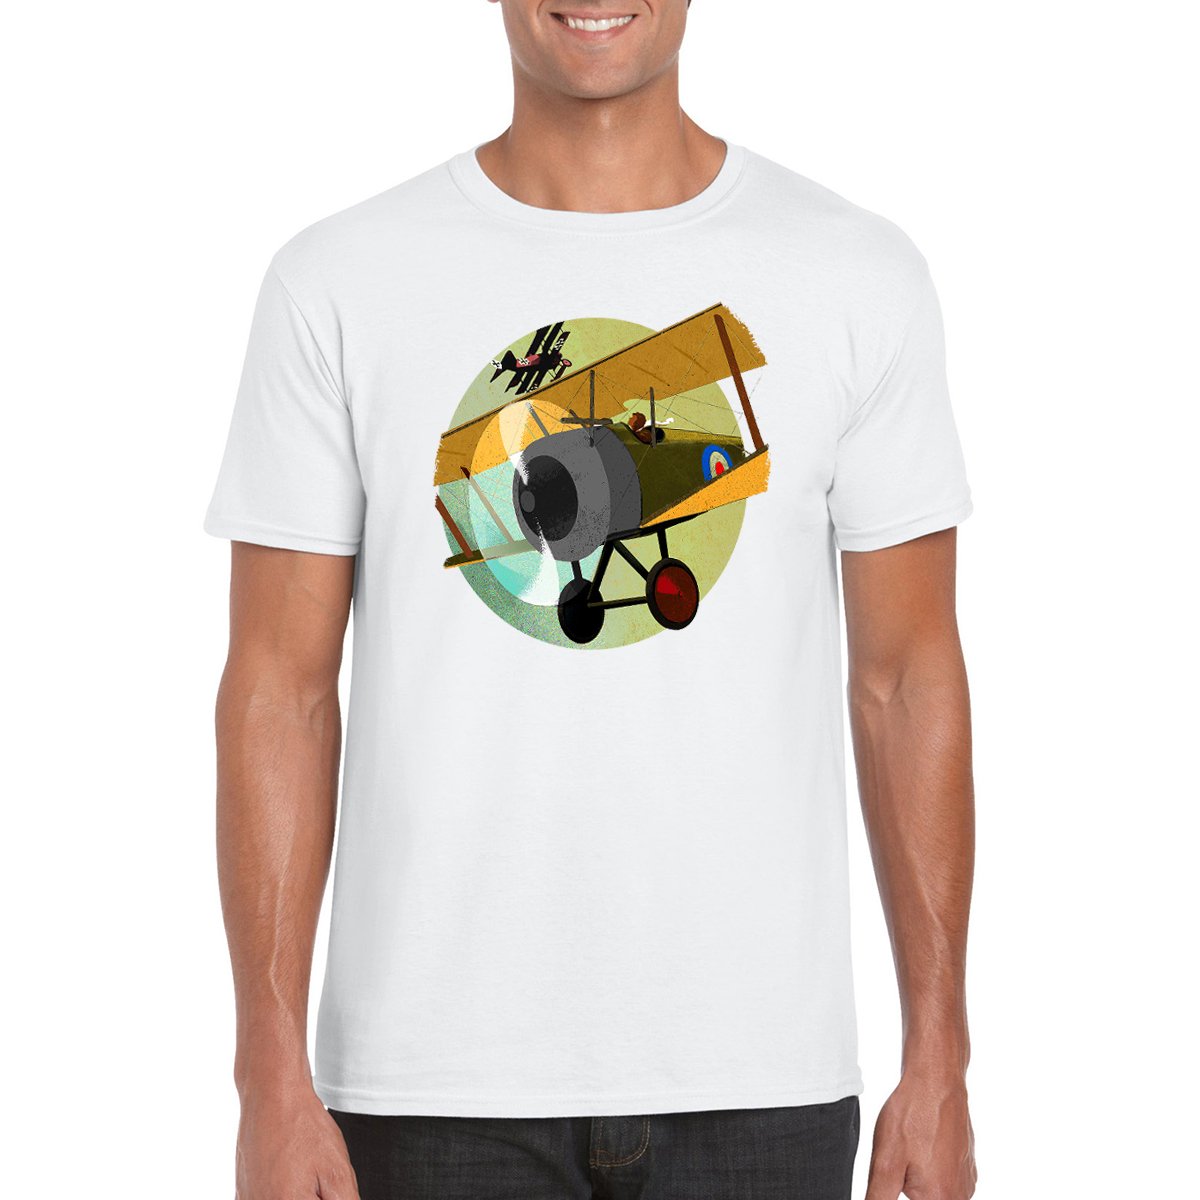 TALLY-HO Unisex Semi-Fitted T-Shirt